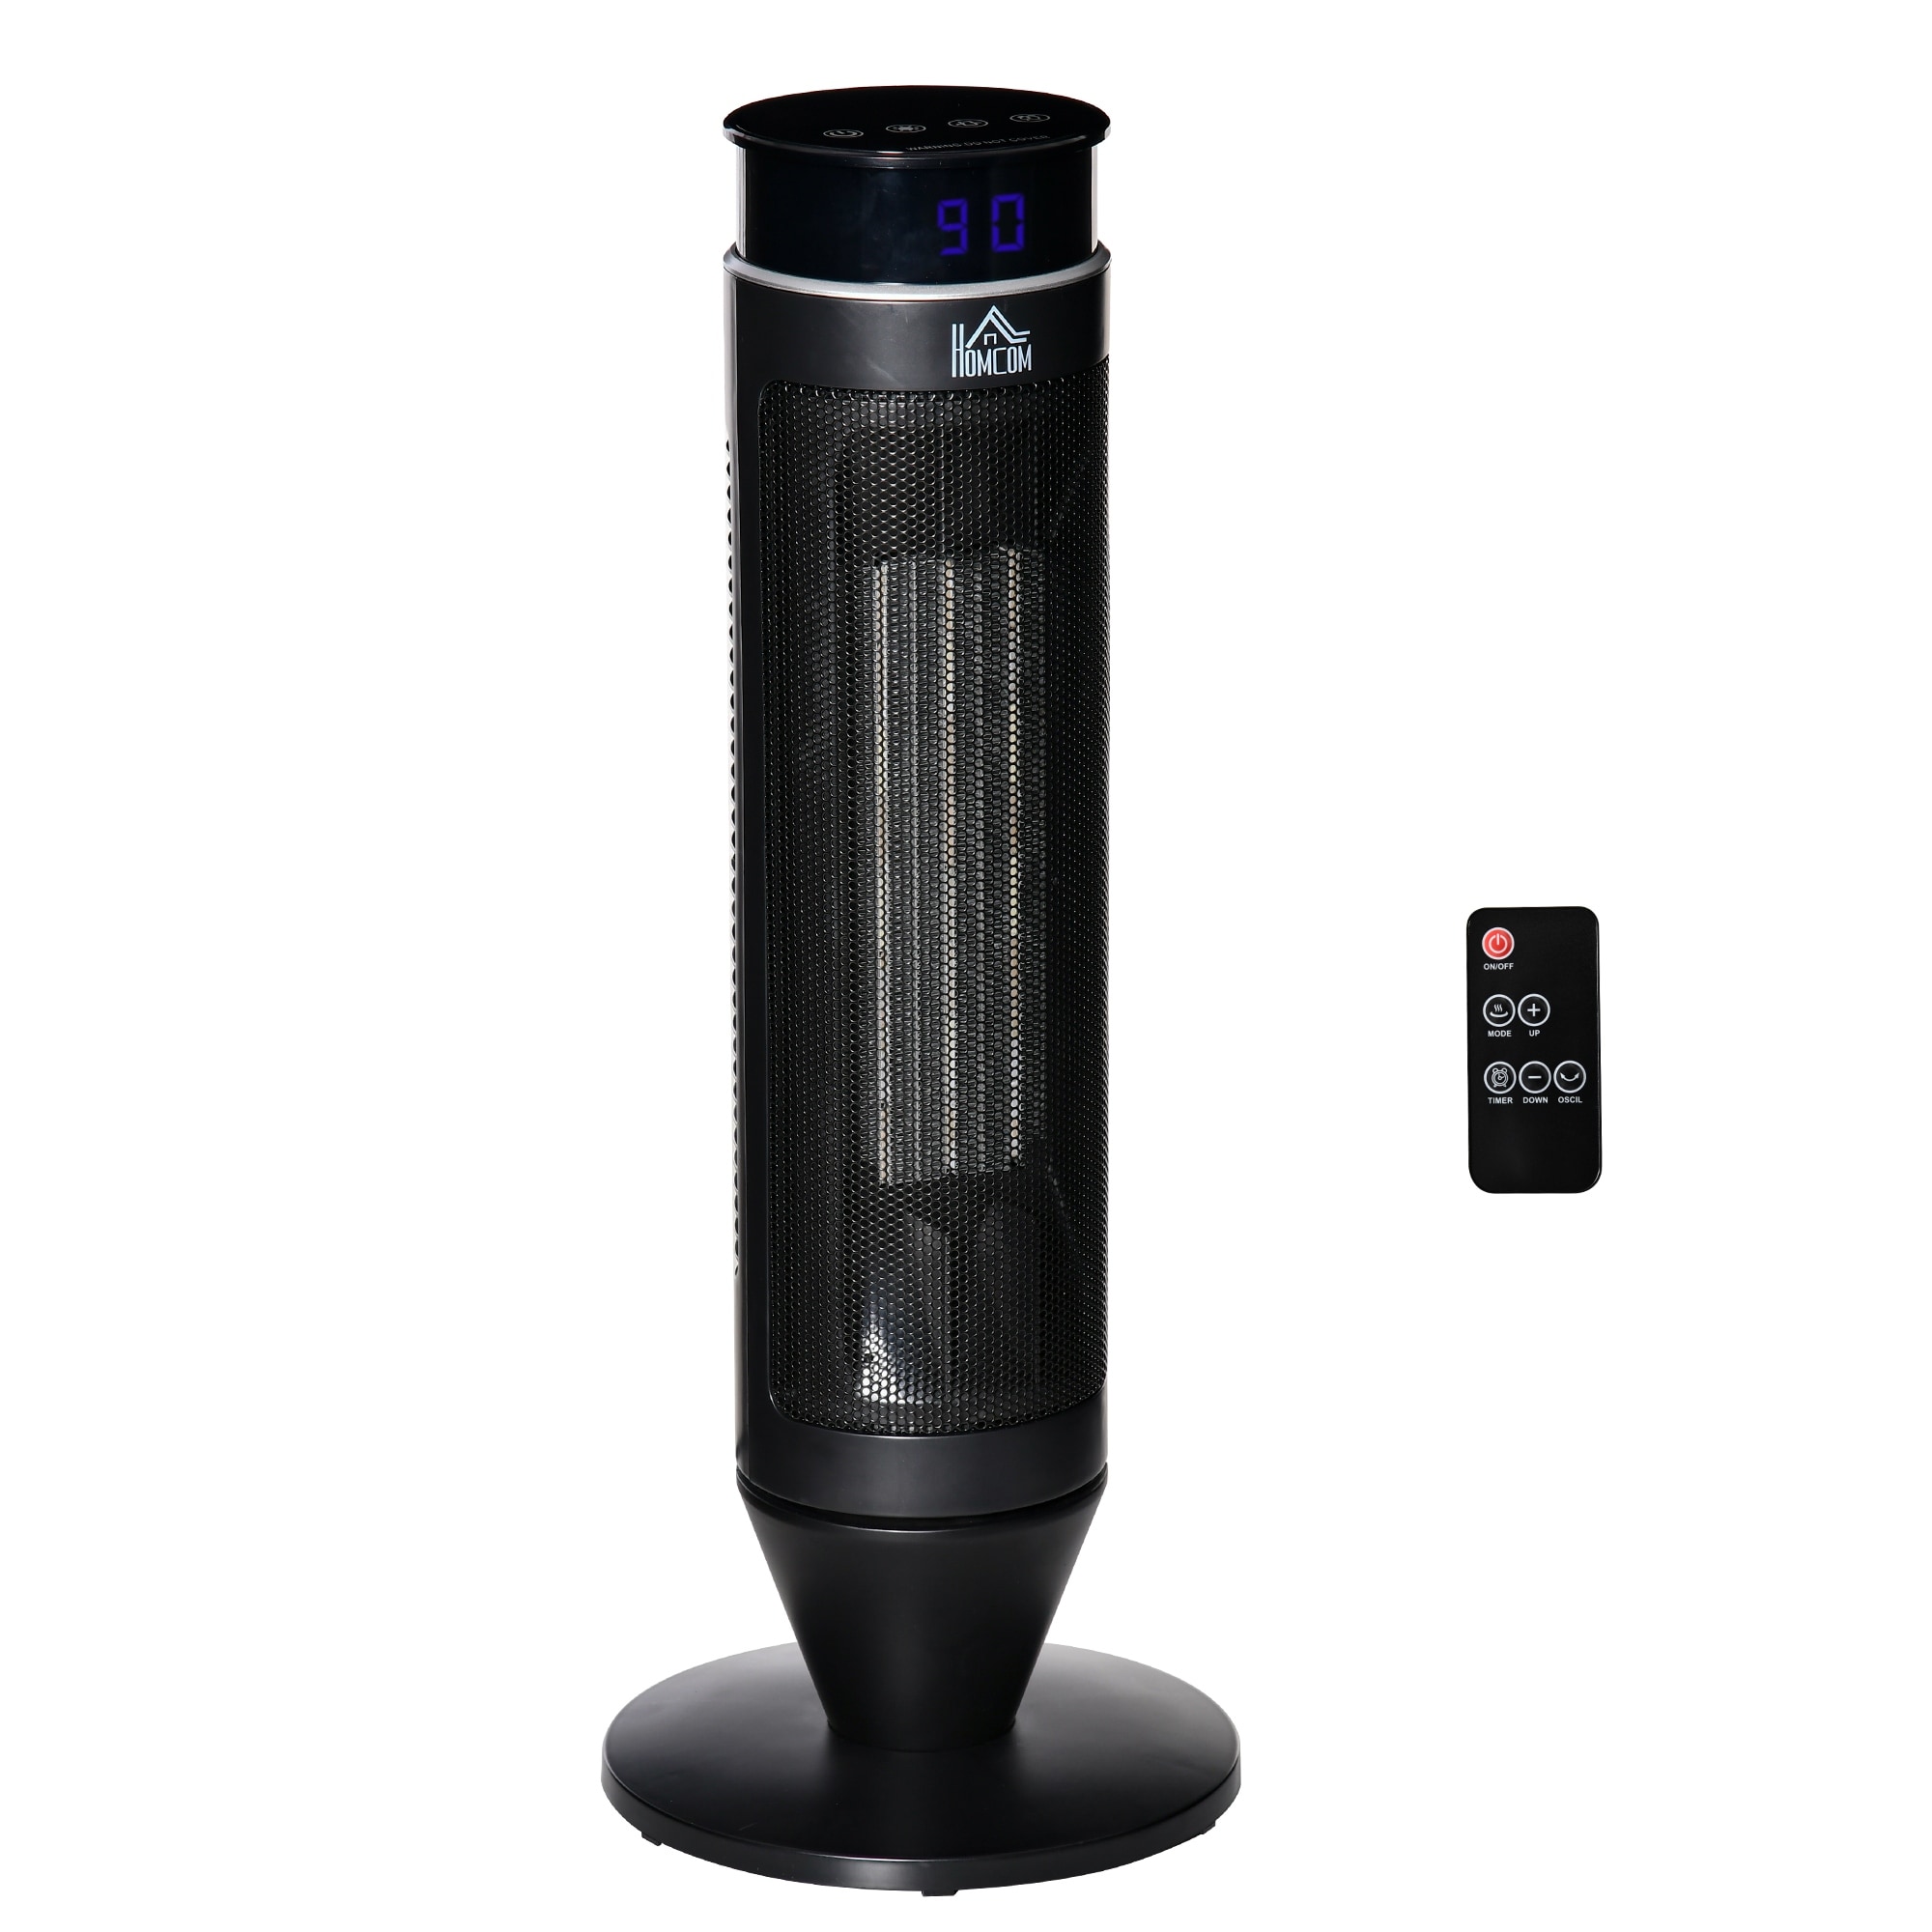 https://ak1.ostkcdn.com/images/products/is/images/direct/cdaec8f5adf0dc9e172e9ebb4140d20a1857b518/HOMCOM-Tower-Fan%2C-Electric-Space-Heater-with-Oscillation%2C-Remote-Control%2C-8H-Timer%2C-and-Overheating-Protection%2C-750W---1500W.jpg